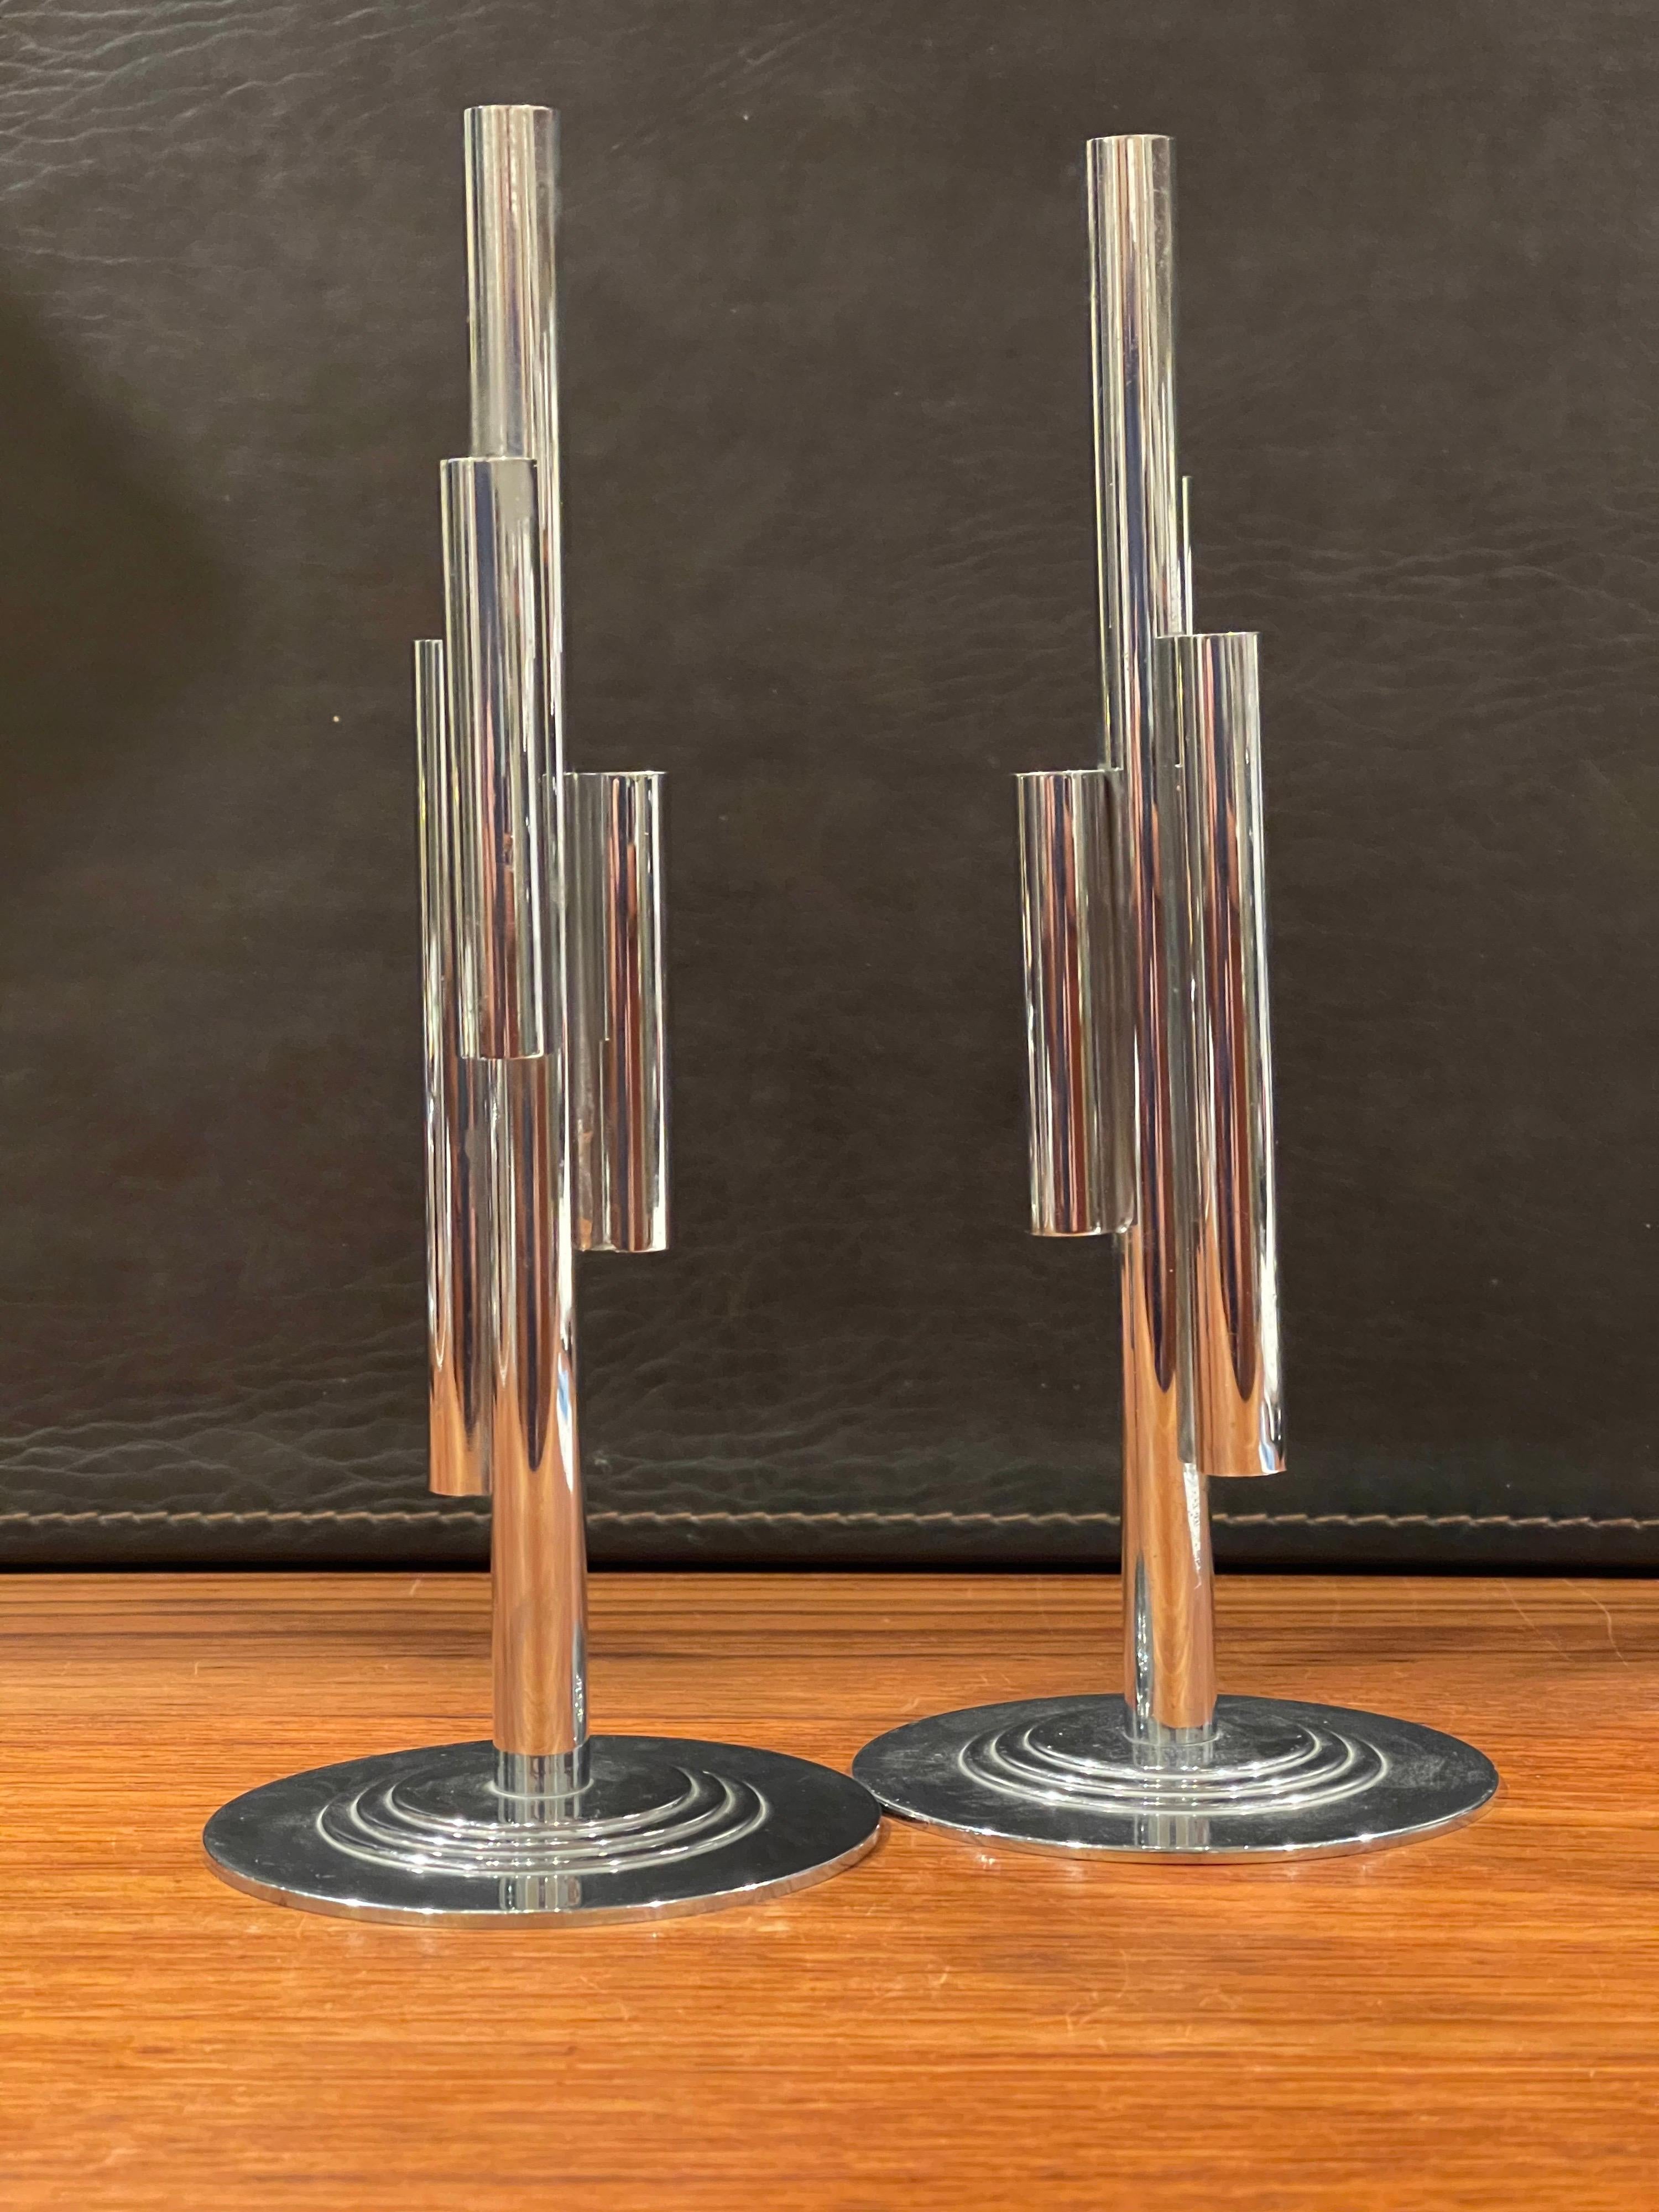 Pair of Art Deco Tubular Chrome Bud Vases by Ruth & William Gerth for Chase Co For Sale 4